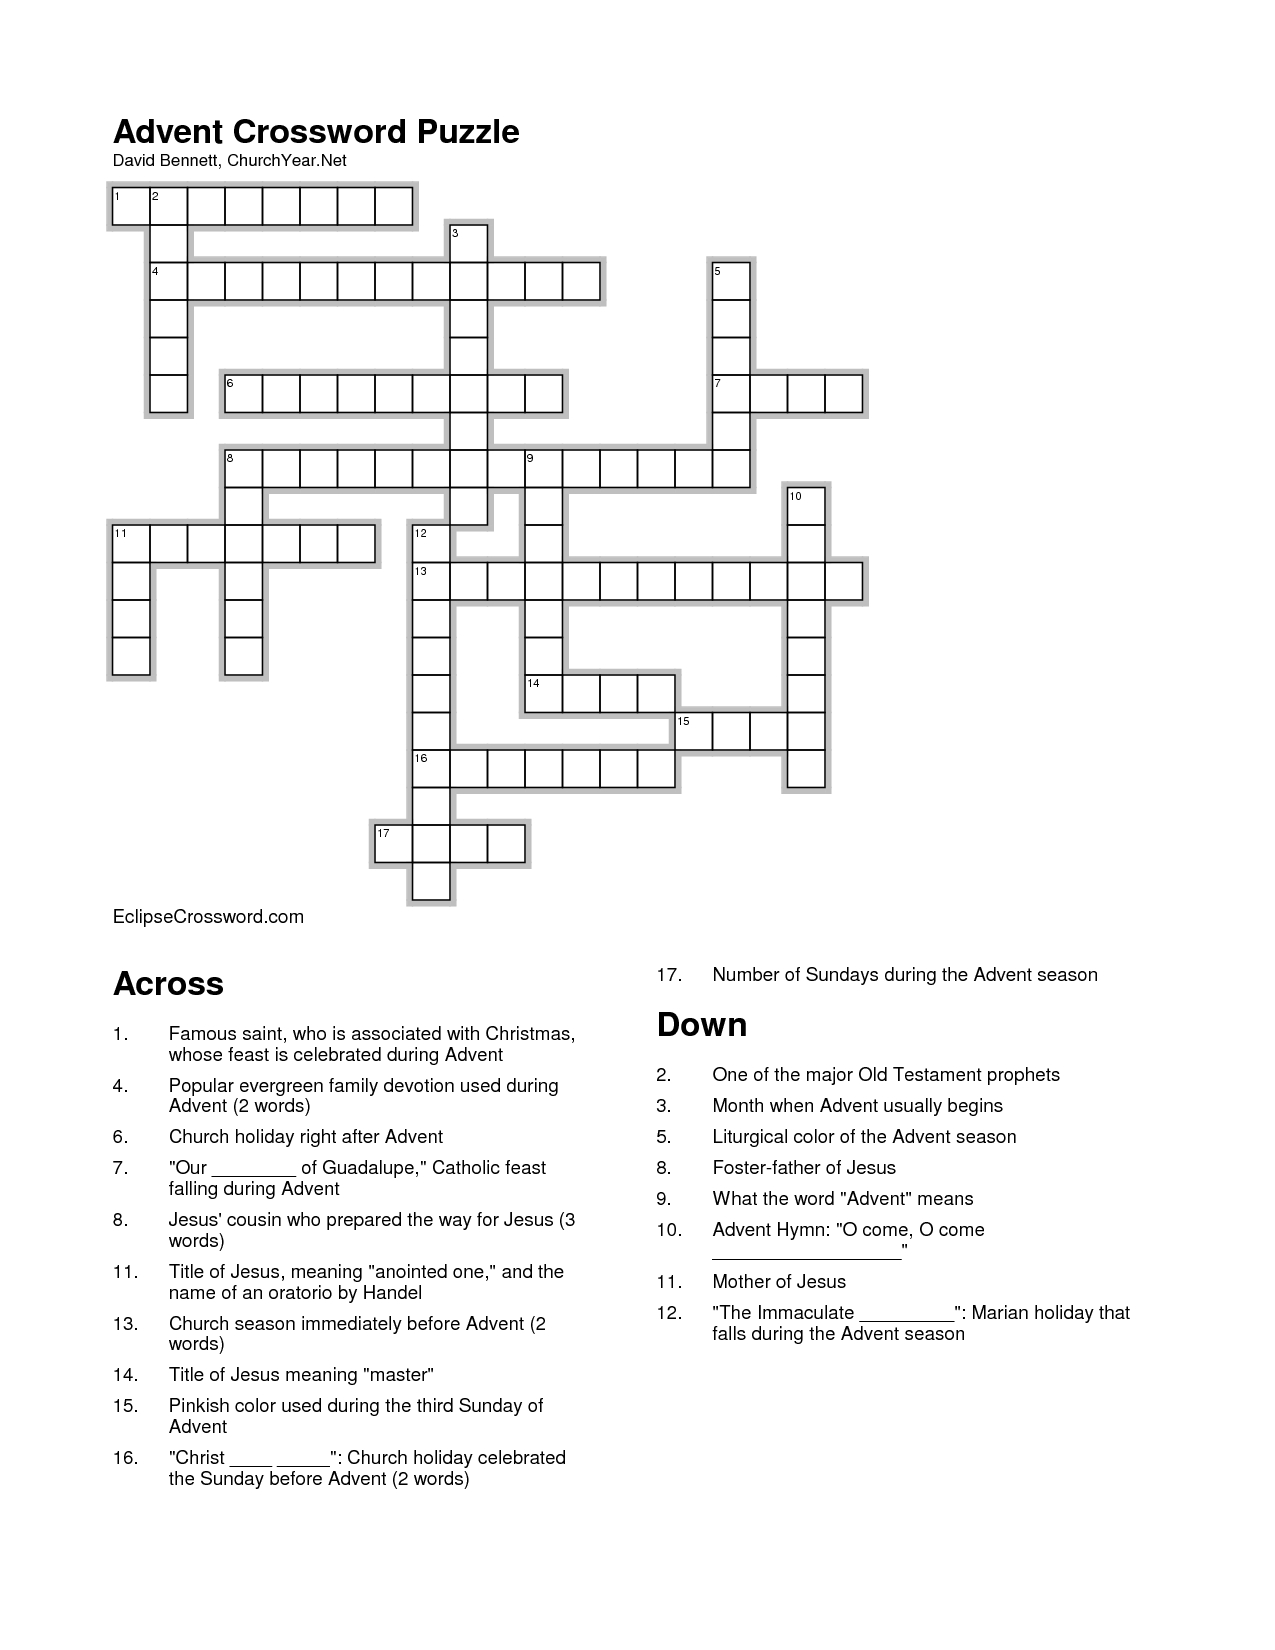 Pinartsmart21 Smith On Religion | Christmas Puzzle, Advent - Printable Advent Puzzle